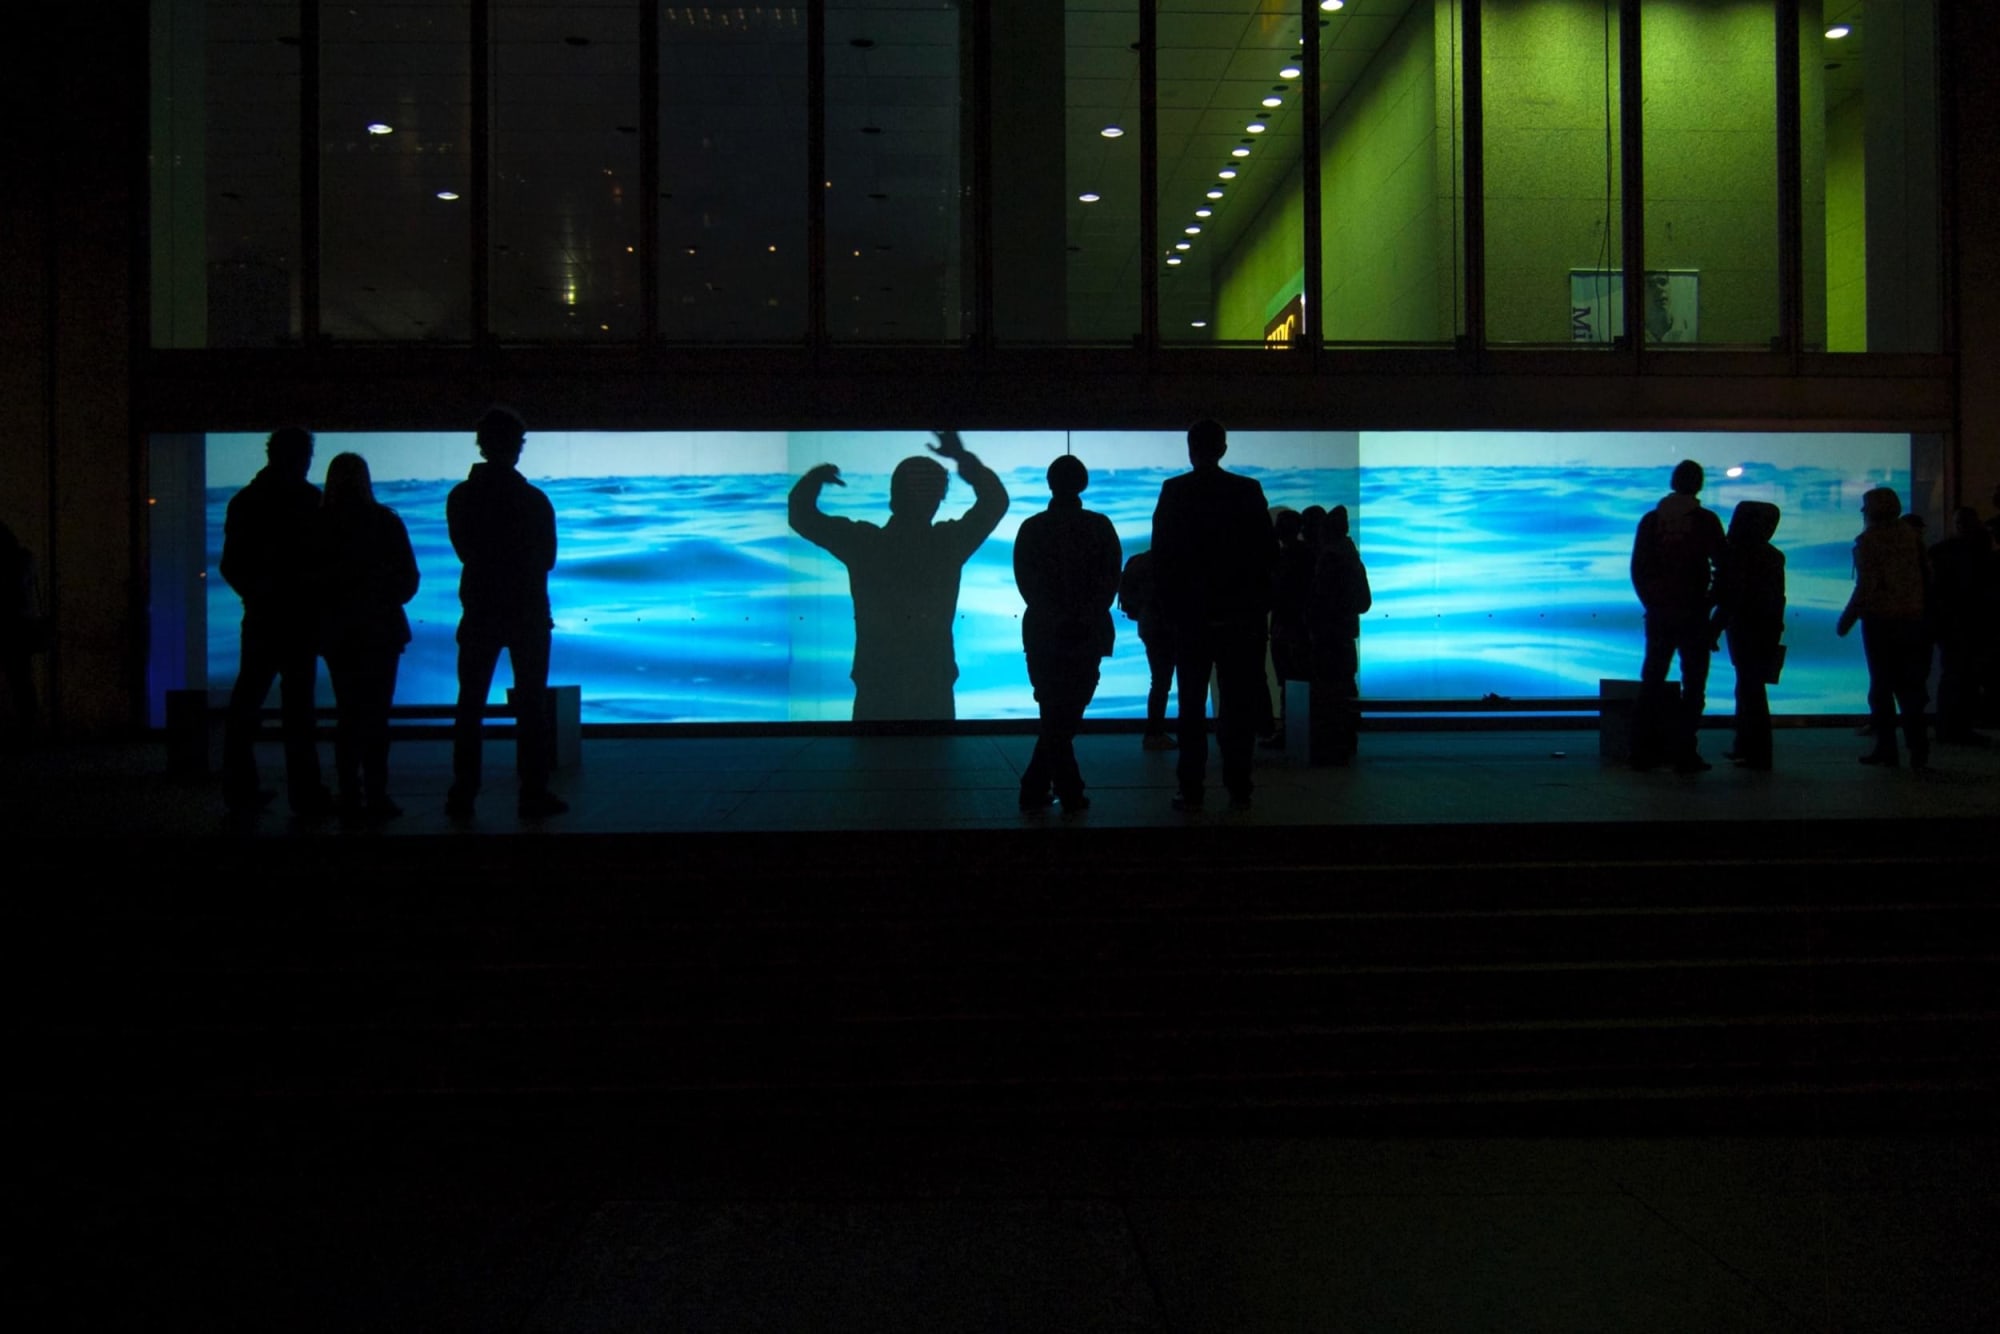 Nighttime photograph of about a dozen people, all with their backs to the camera, looking at the projected image of a body of water in front of them. In the middle of the projected image is a large silhouette of a figure performing a dance maneuver, which is quite striking if you ask me.